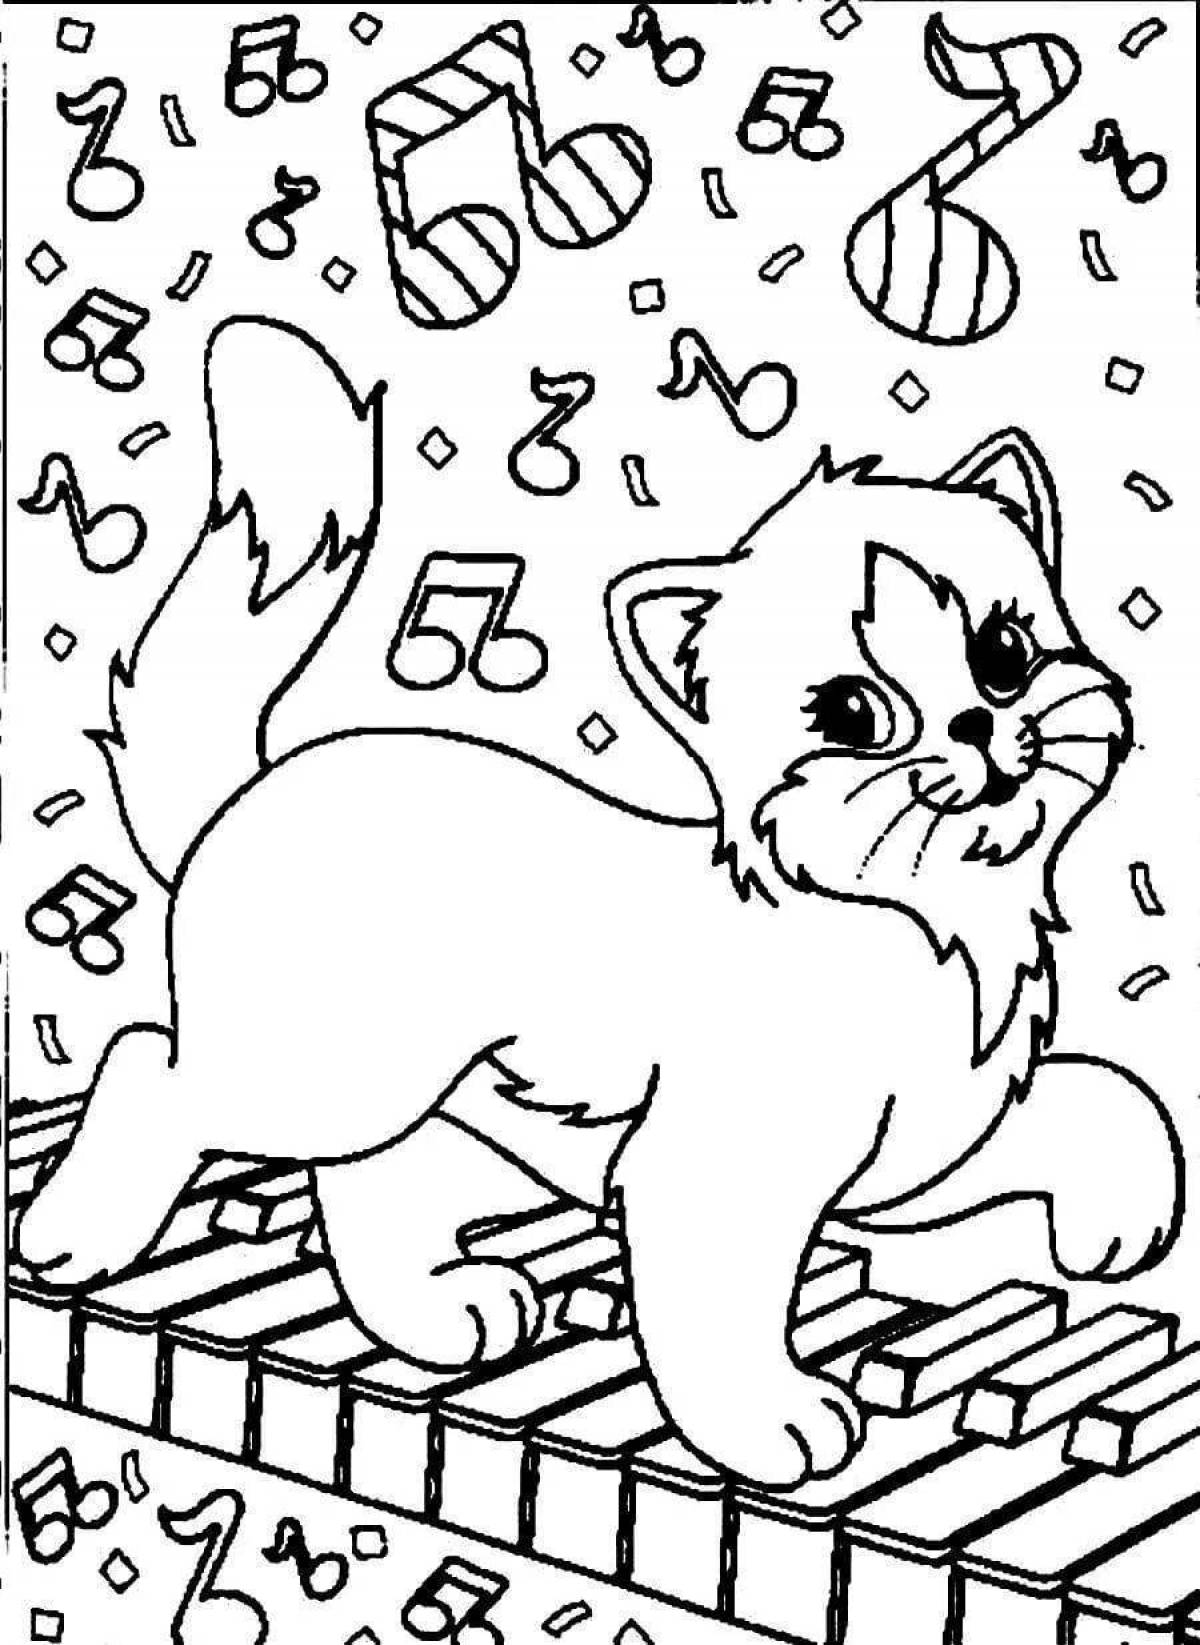 Violent kittens coloring for children 6-7 years old